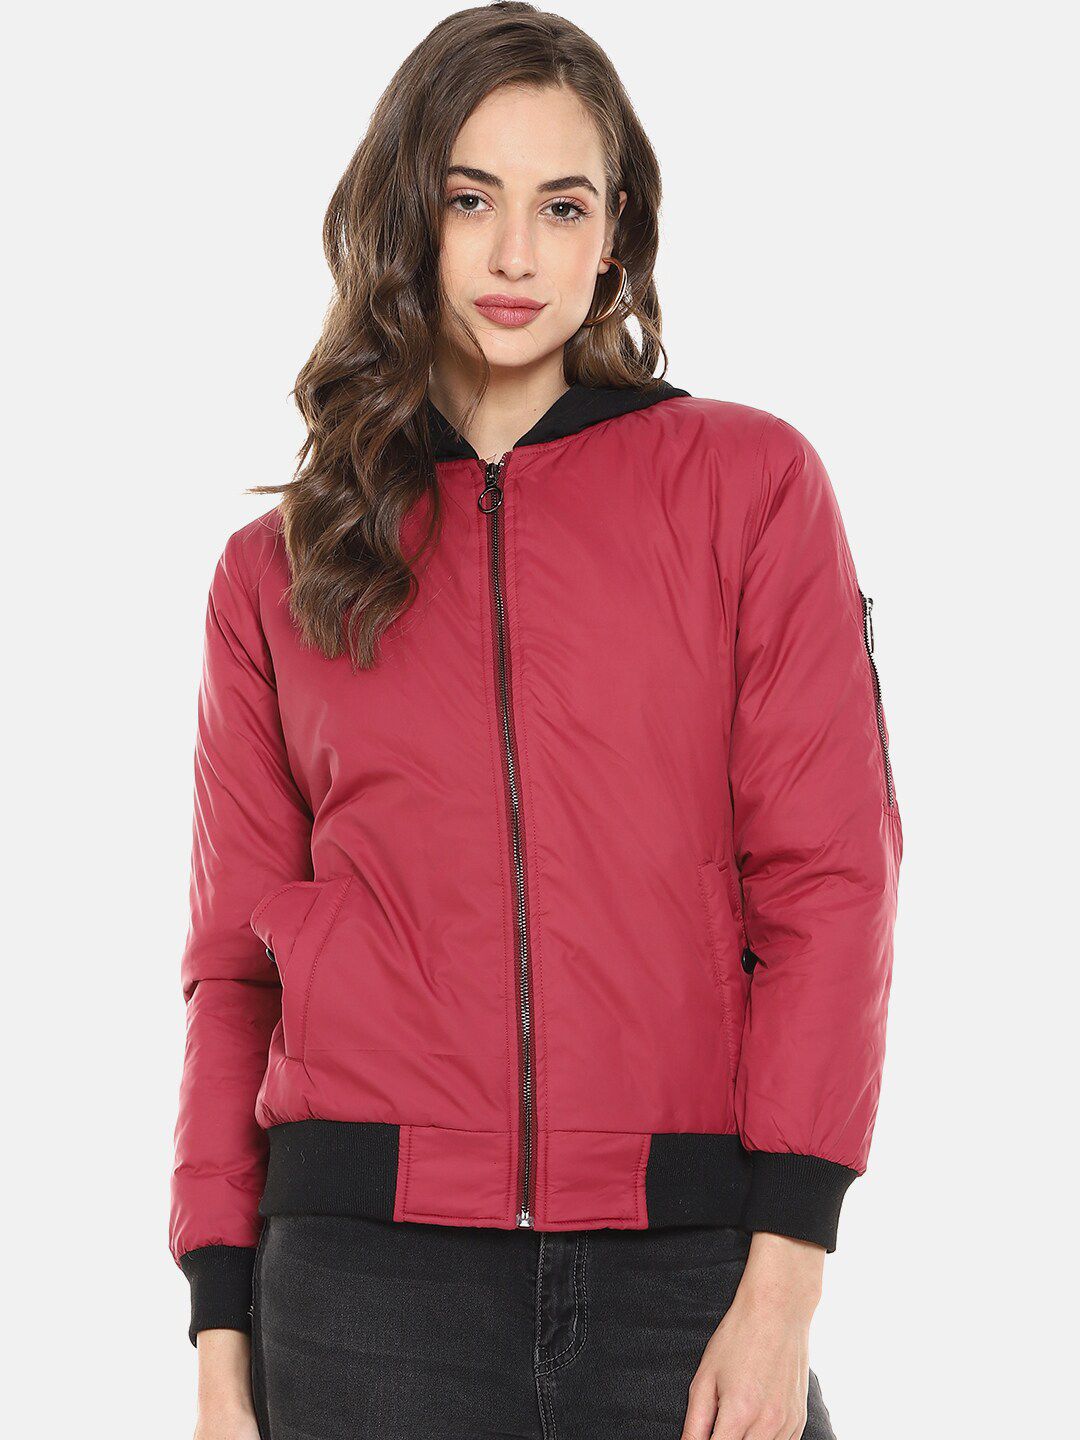 Campus Sutra Women Red & Black Windcheater Bomber Jacket Price in India